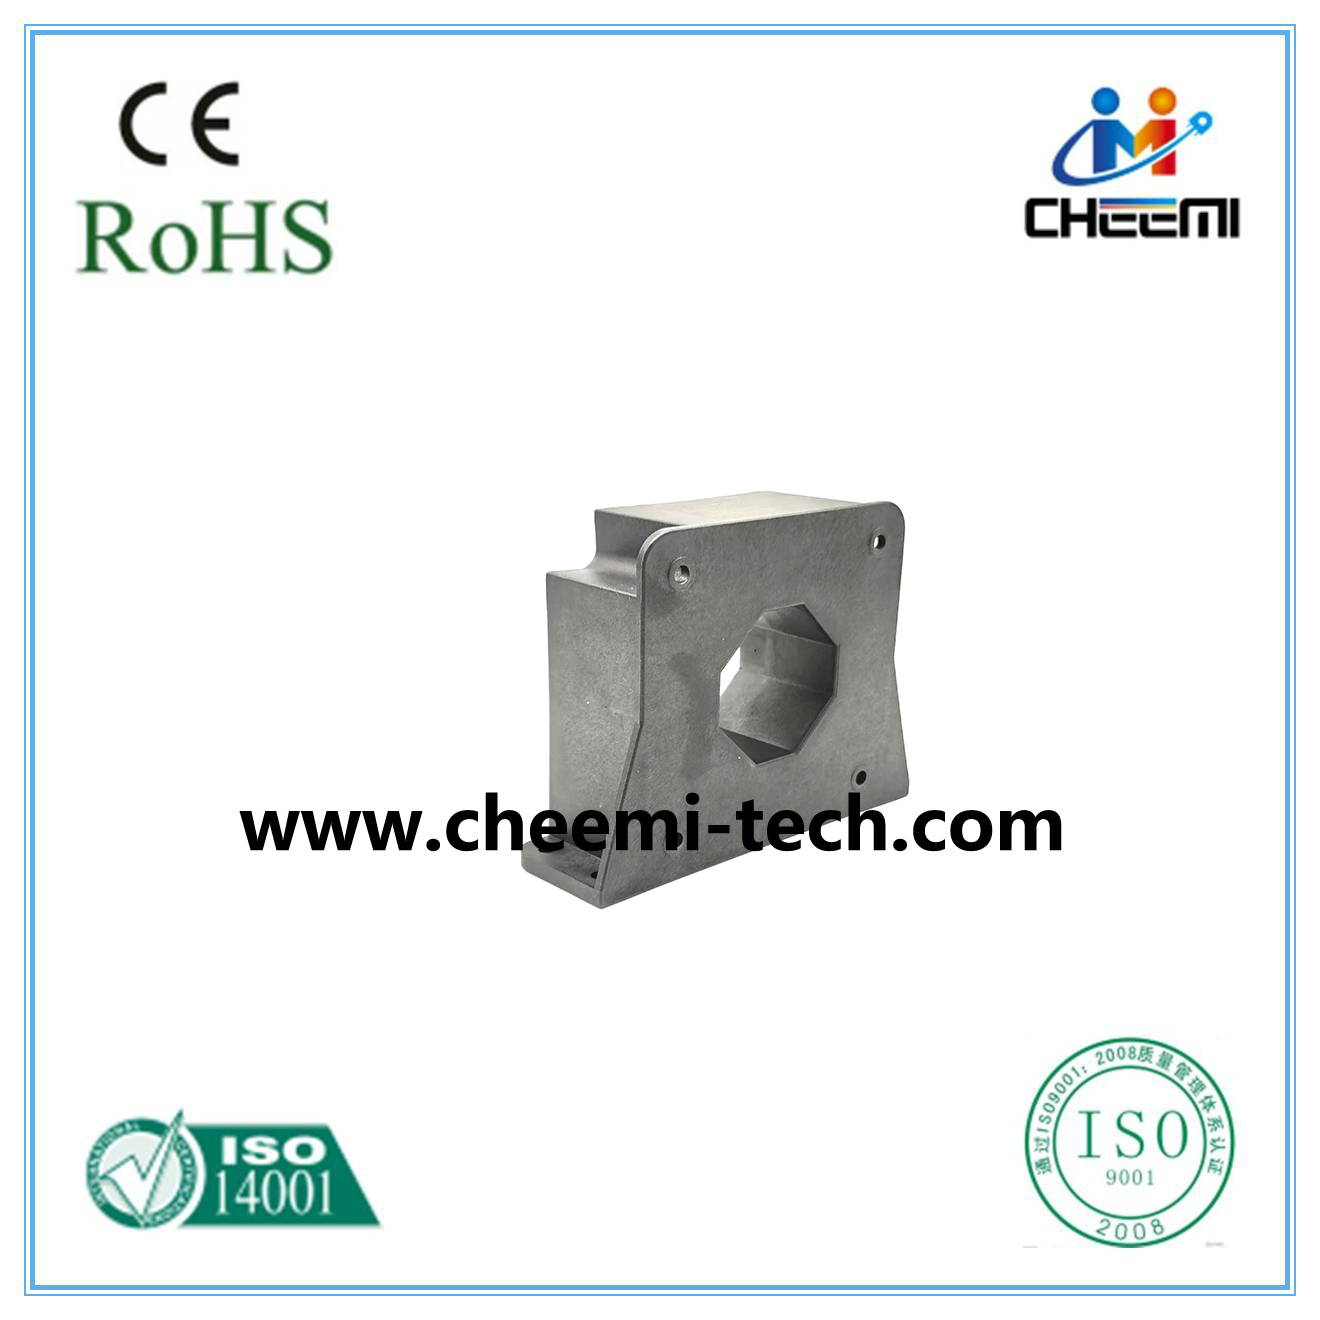 High accuracy closed loop current transducer 60mm hole size through the copper rod installation